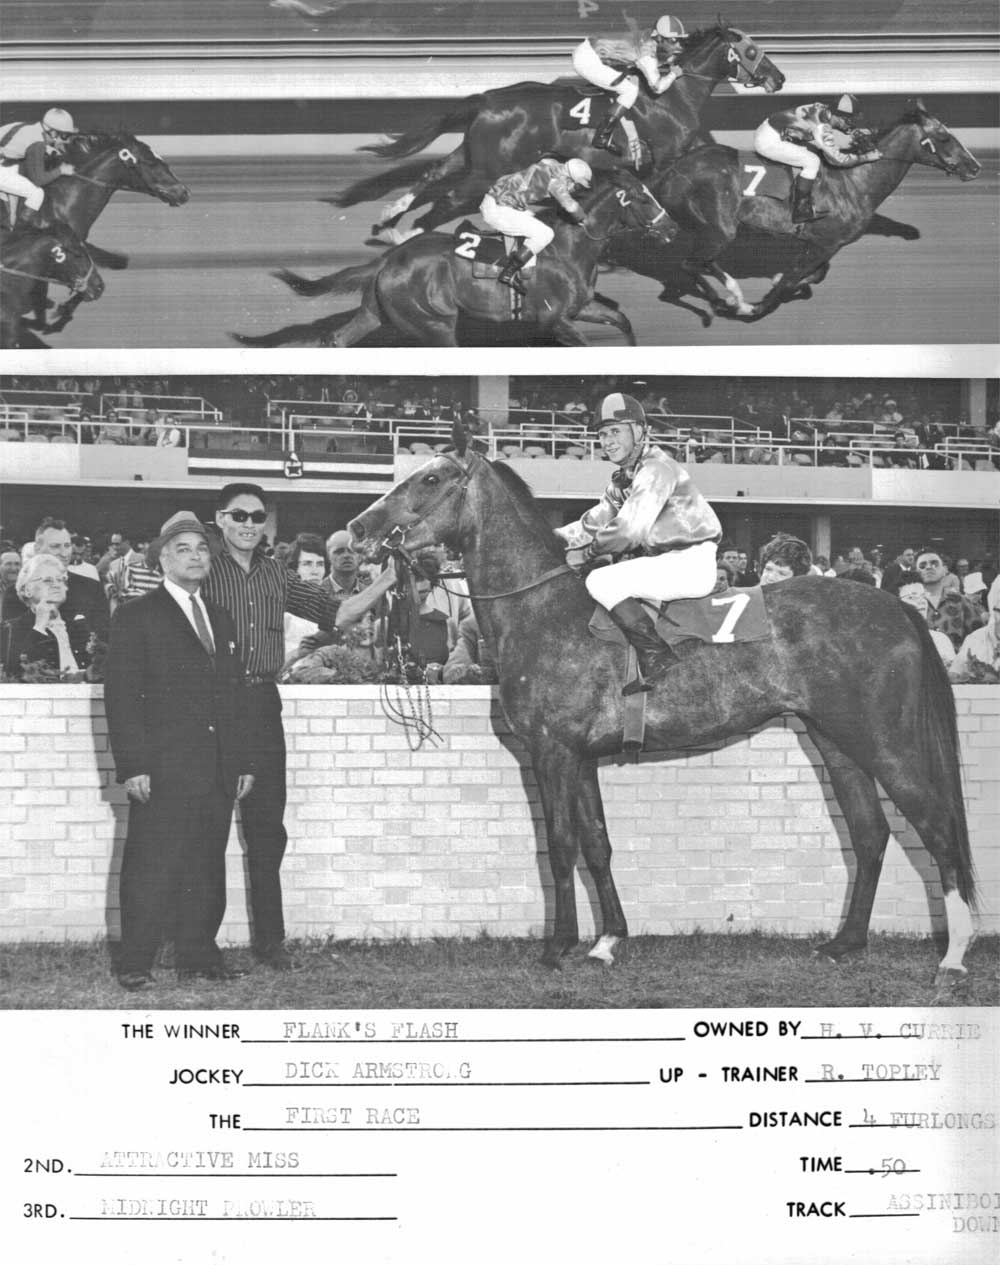 Flank's Flash wins at ASD for leading rider Dick Armstrong. June 22, 1962. 